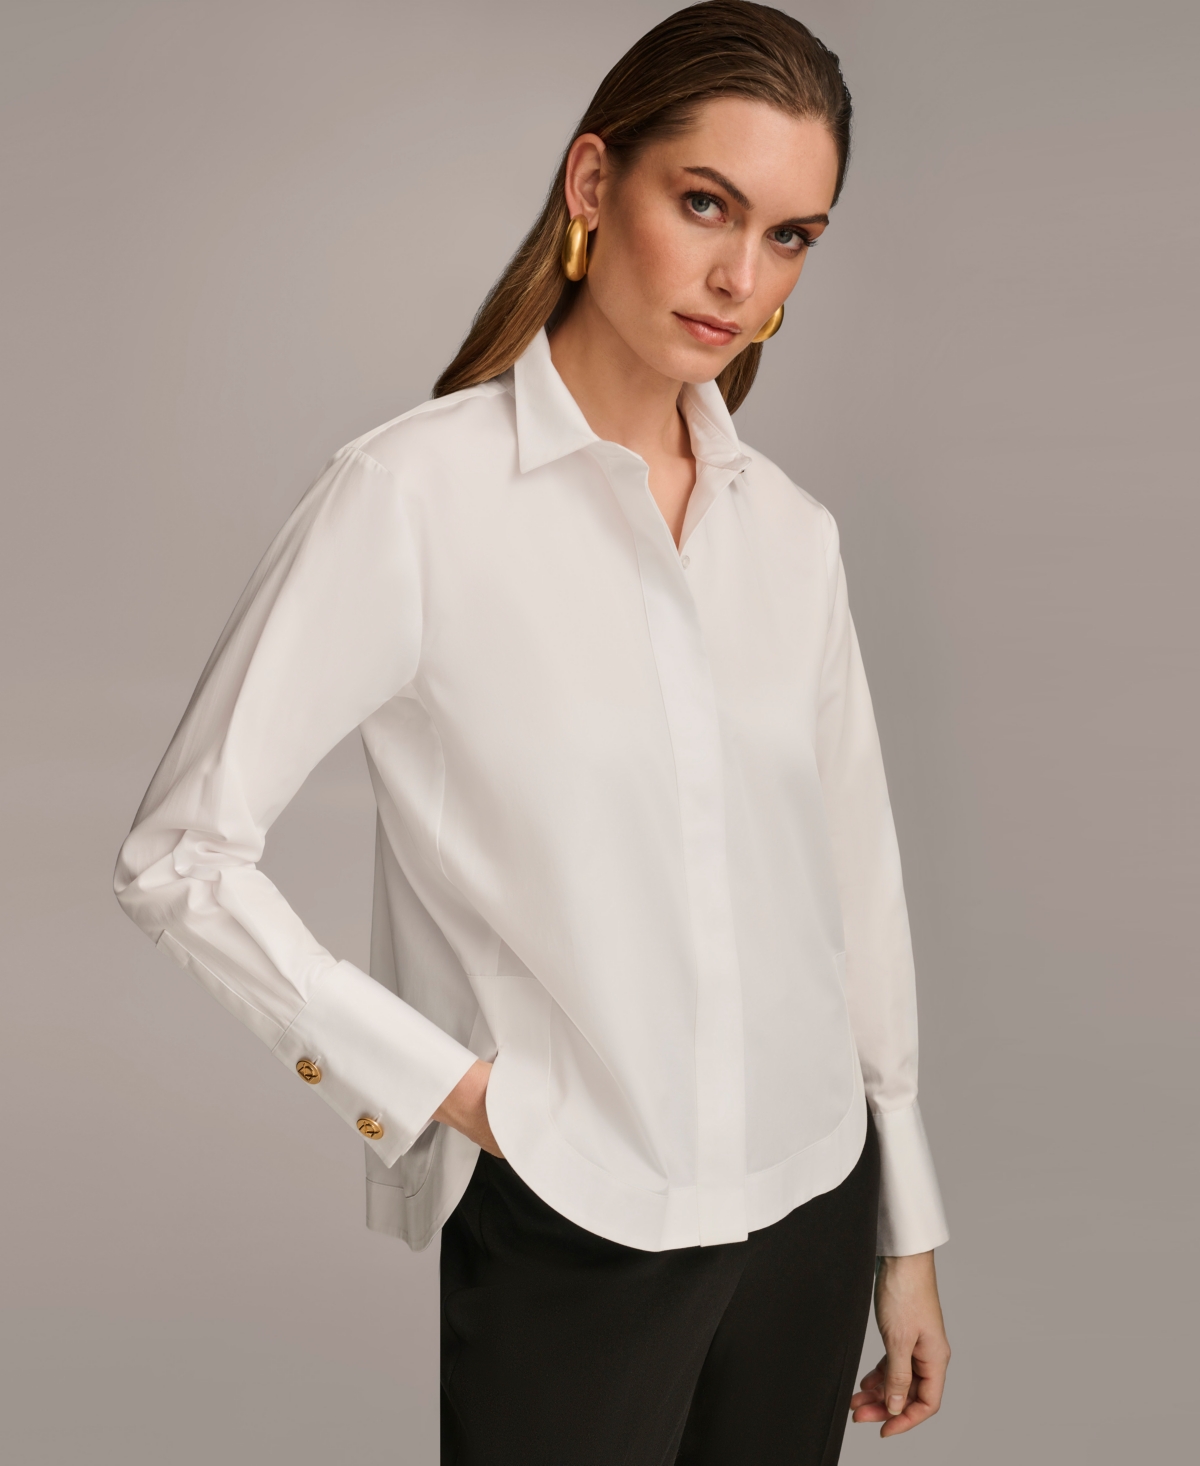 Women's Button Front Collared Shirt - White